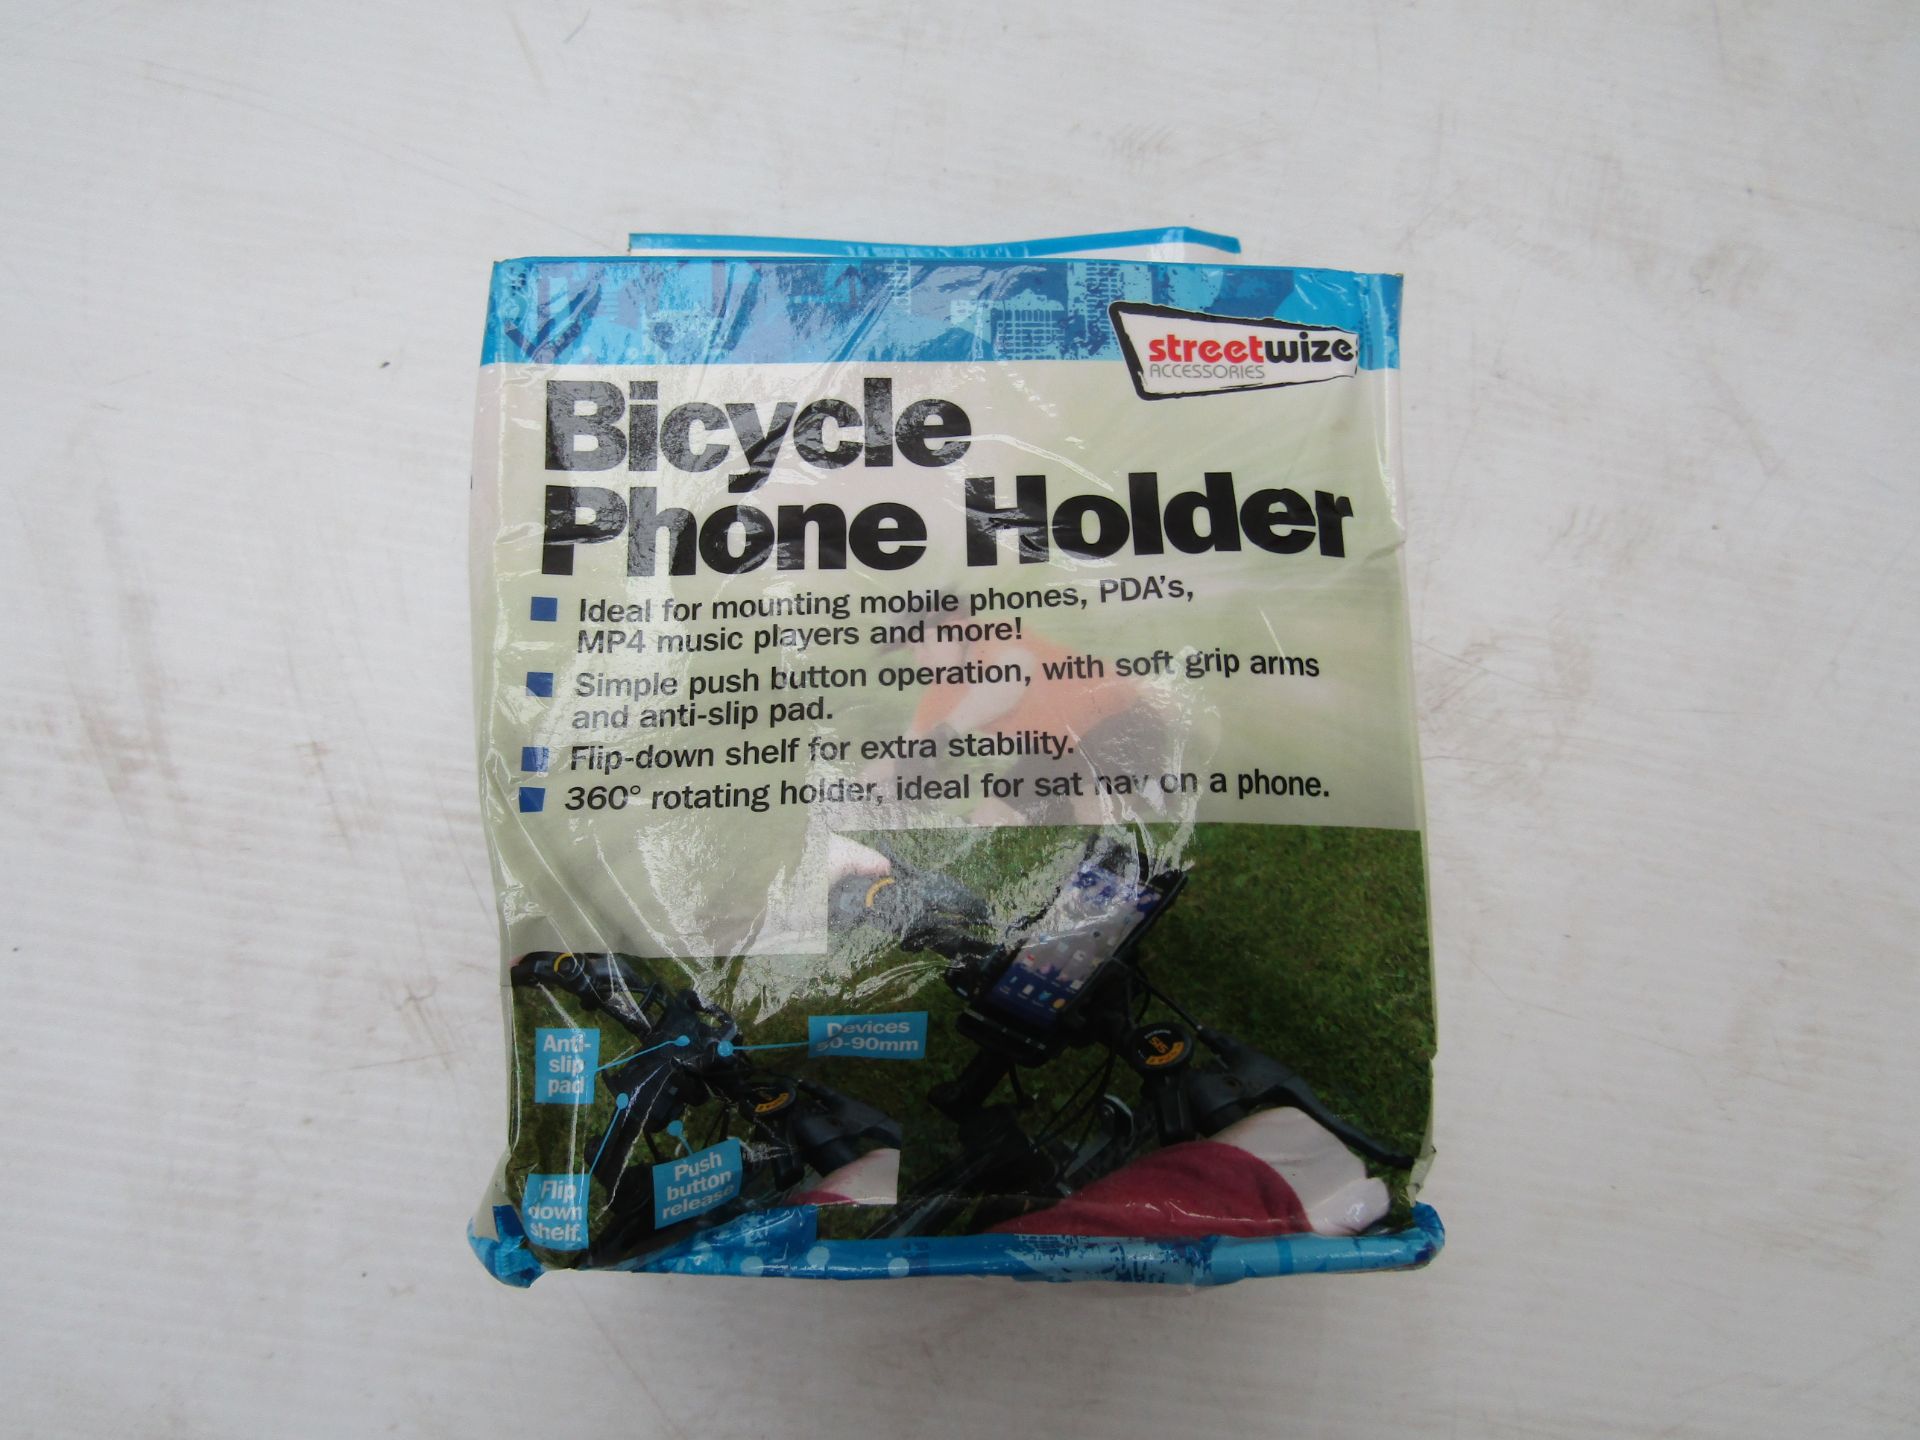 10x StreetWize Bicyle Phone Holder. New and boxed. Packaging may have been wet at some point.